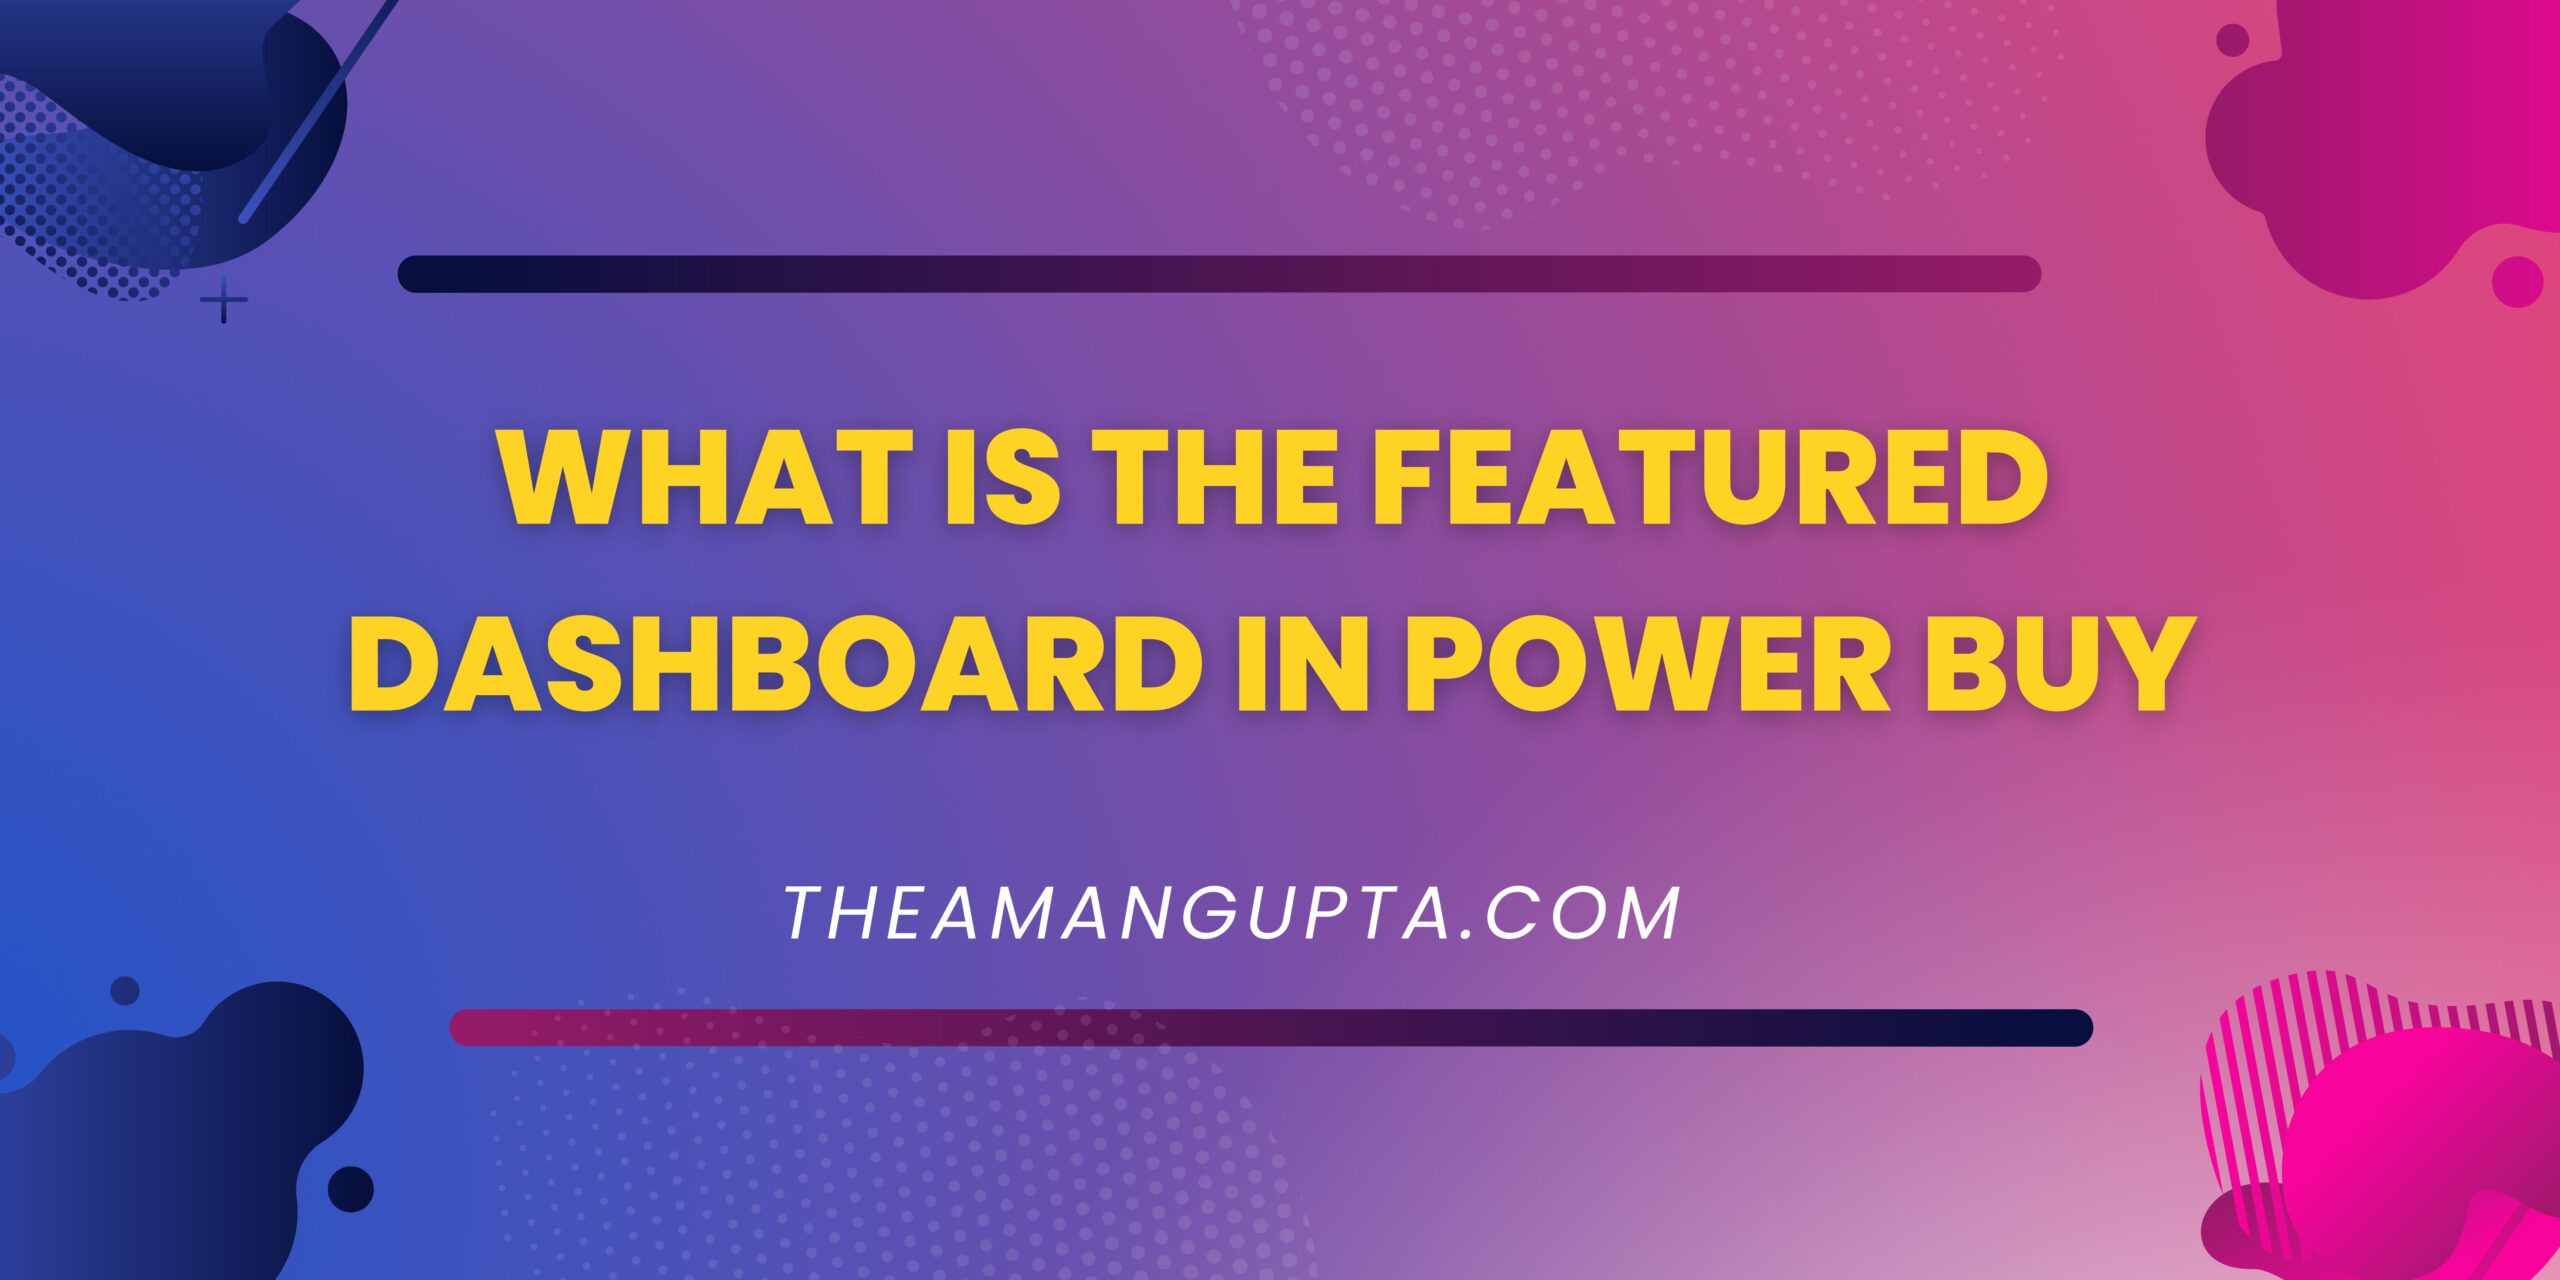 What Is The Featured Dashboard In Power Buy|Dashboard|Theamangupta|Theamangupta